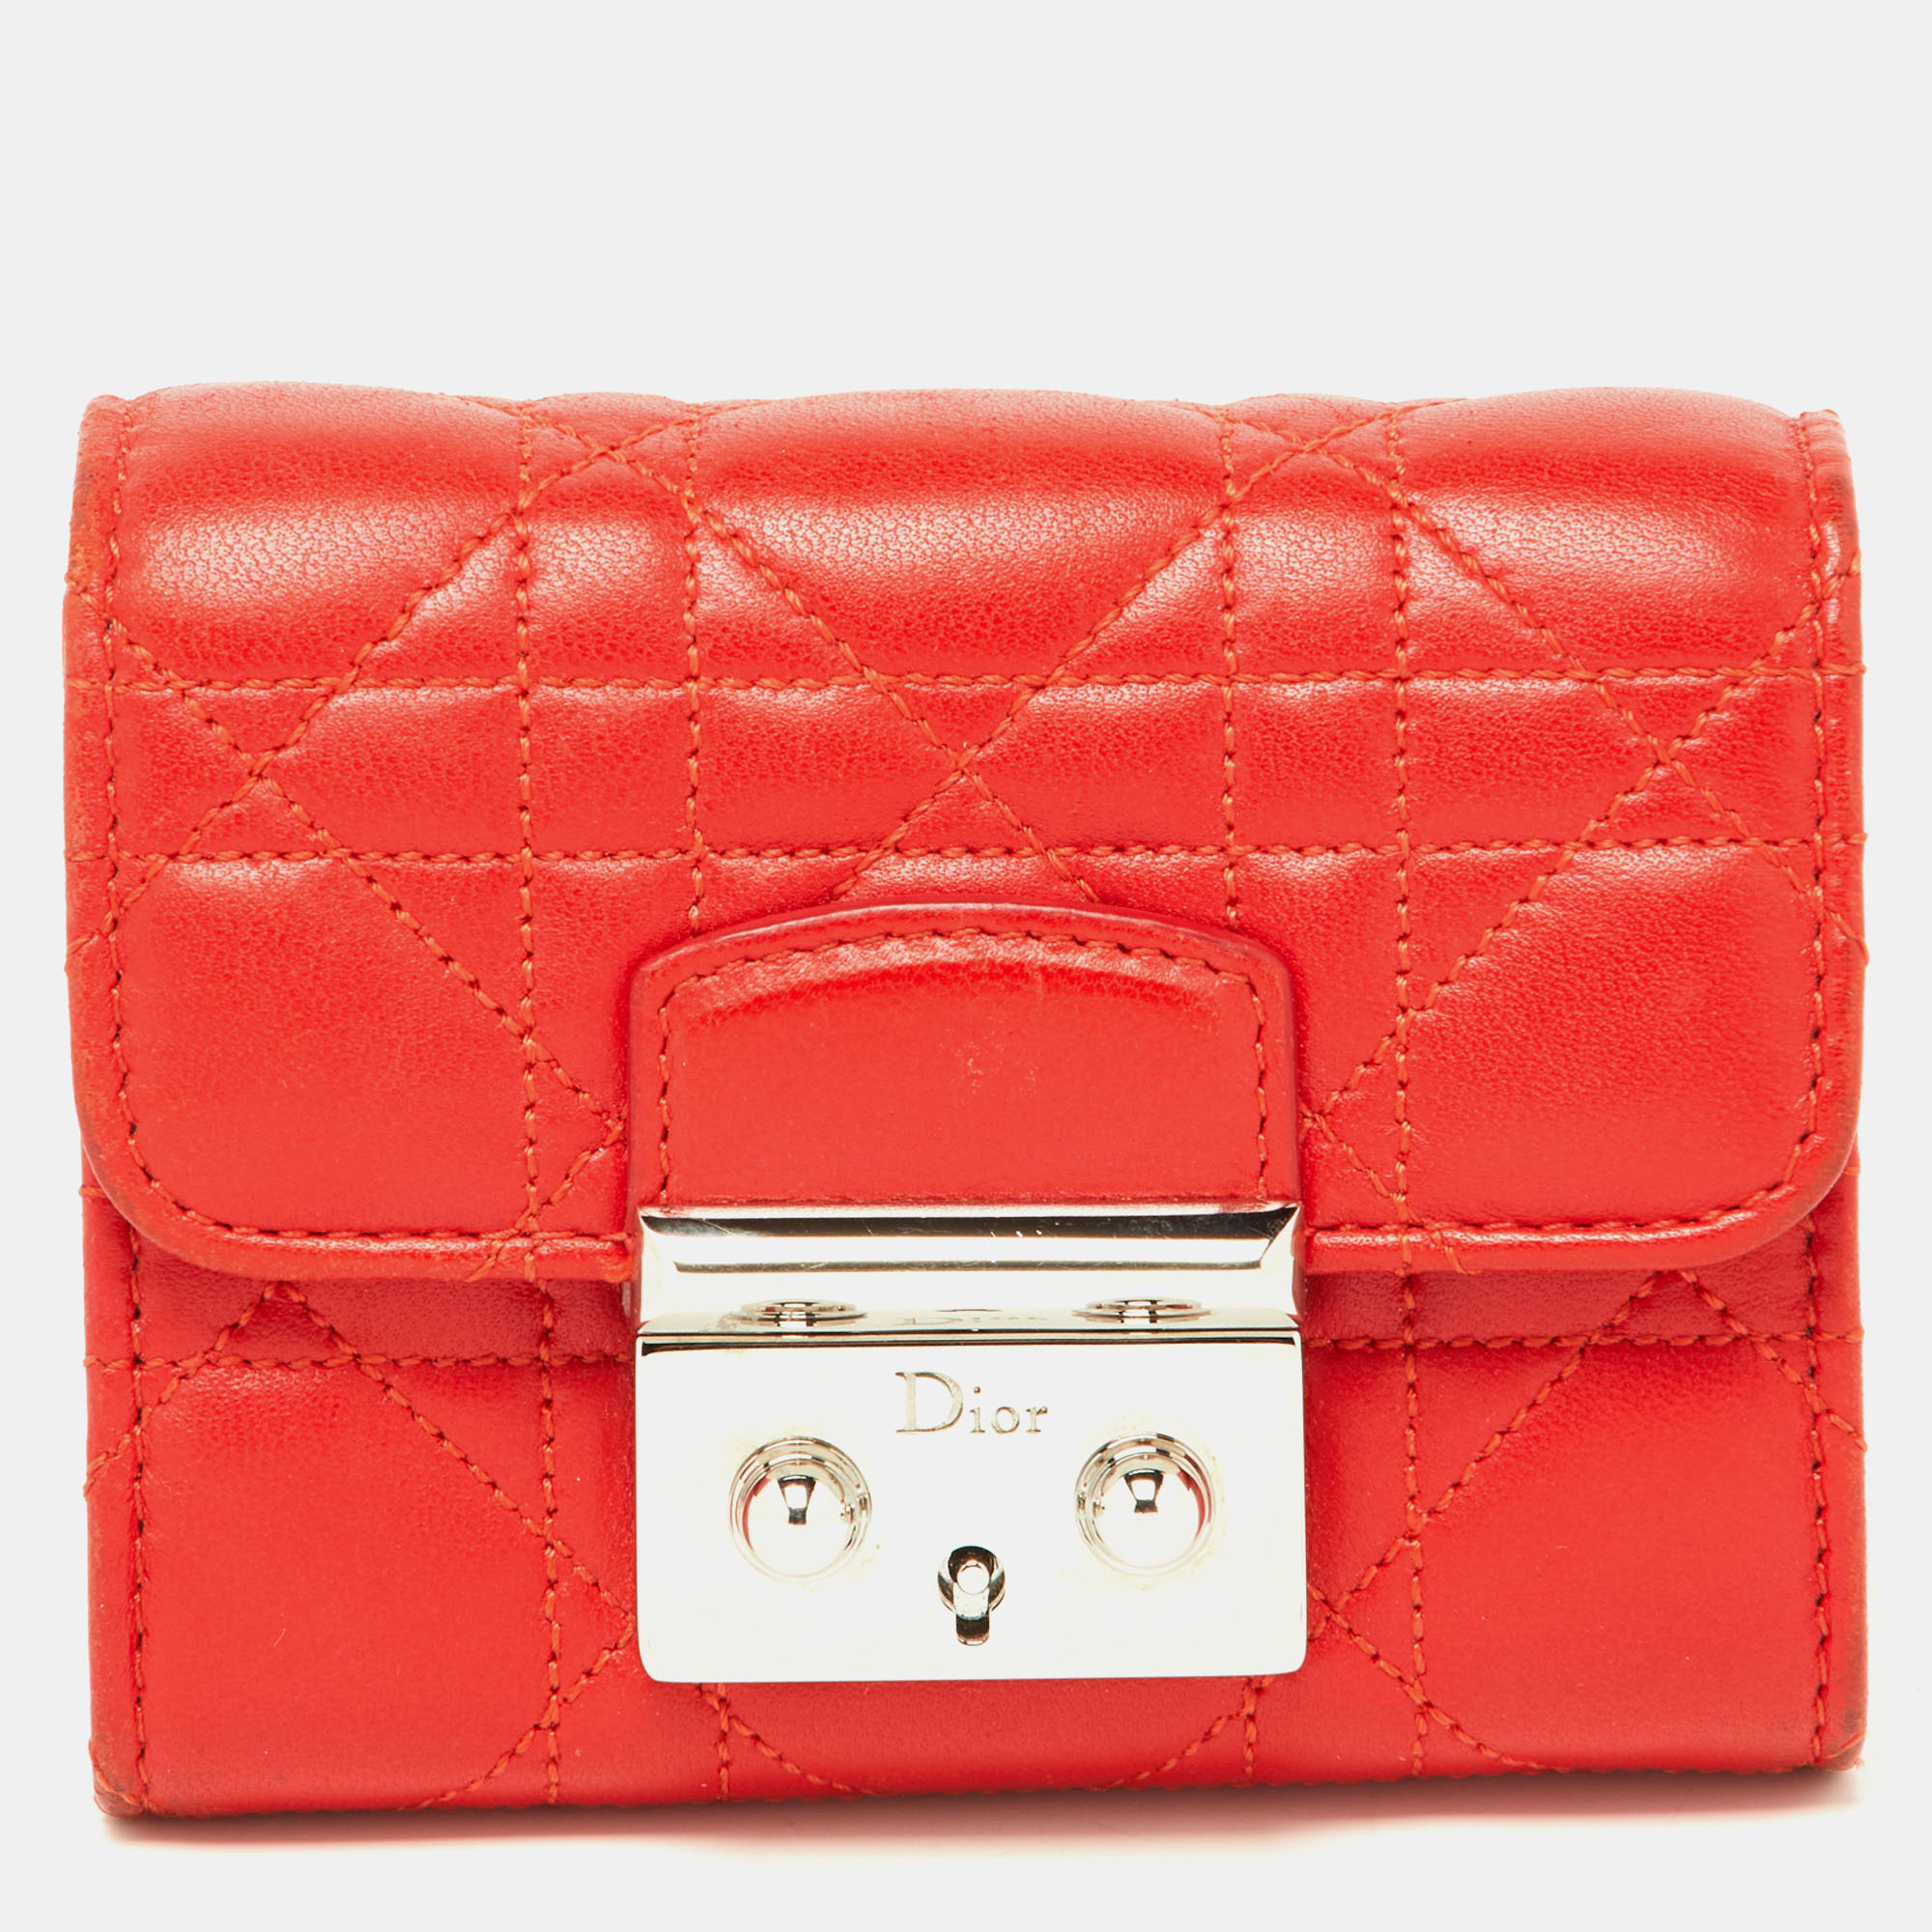 

Dior Red Cannage Leather Miss Dior Compact Wallet